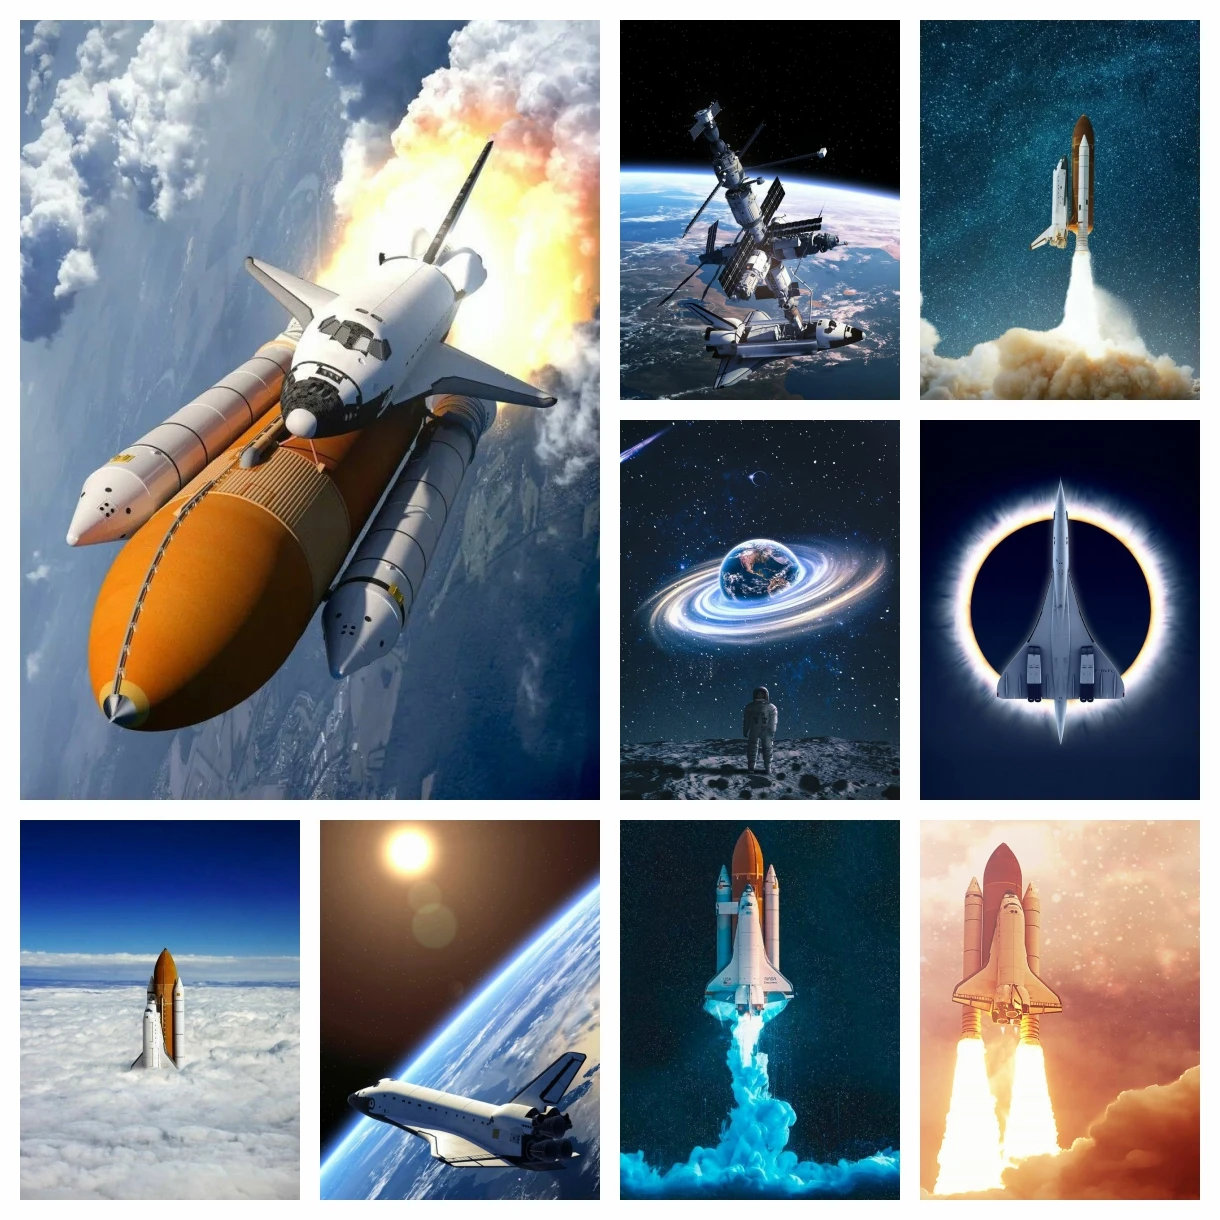 Spacecraft Poster 5D Diamond Painting Rocket Star Astronaut Picture Full Drill Mosaic Embroidery Cross Stitch Kits Home Decor